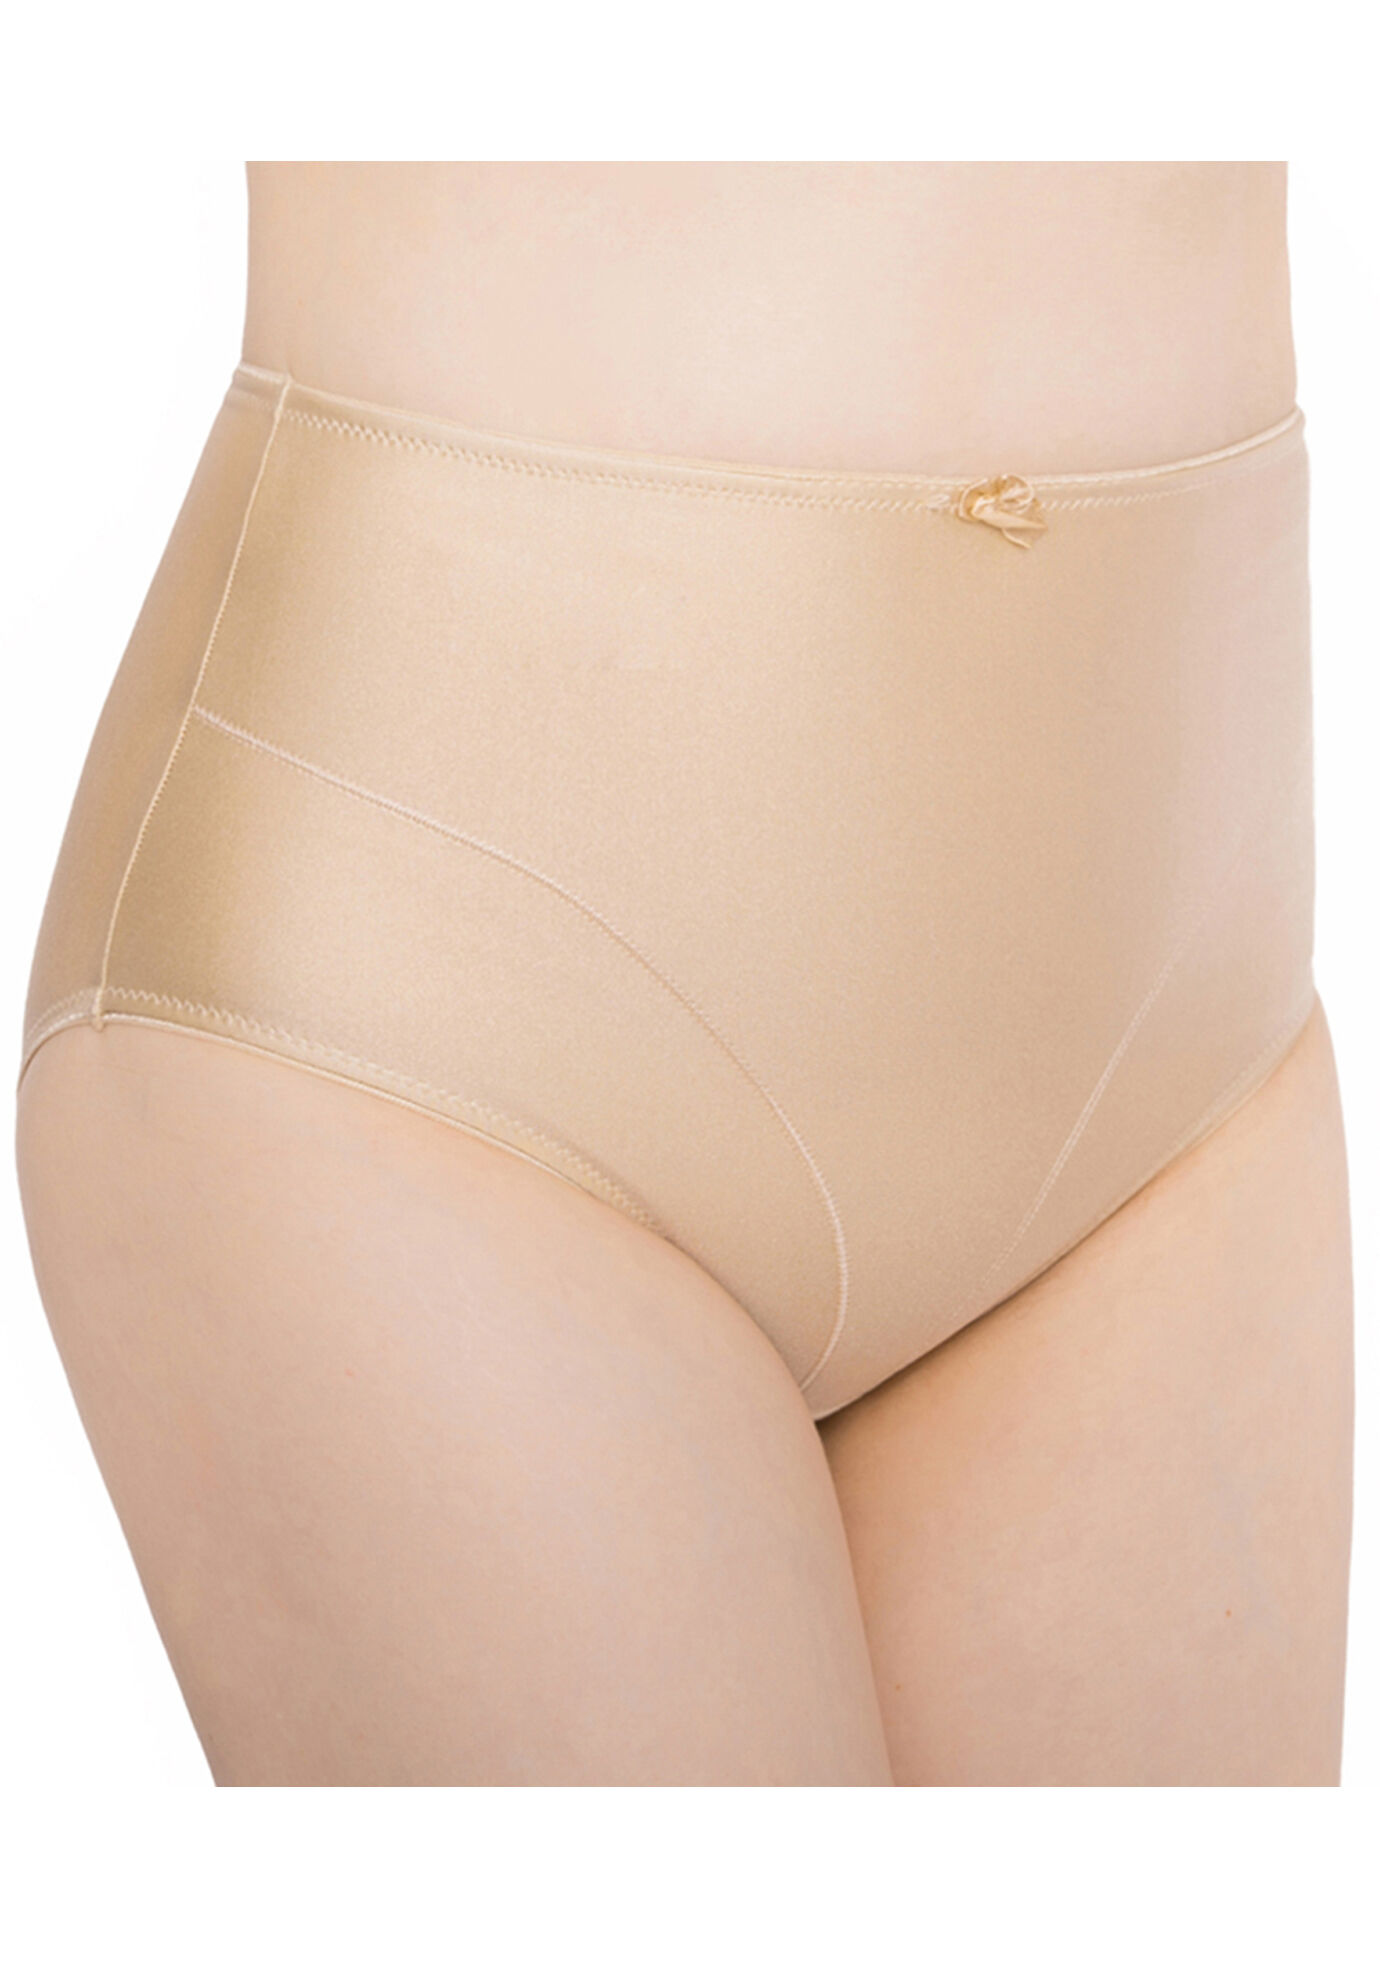 Plus Size Women's Control Top Shaping Panties by Exquisite Form in Nude (Size XL)